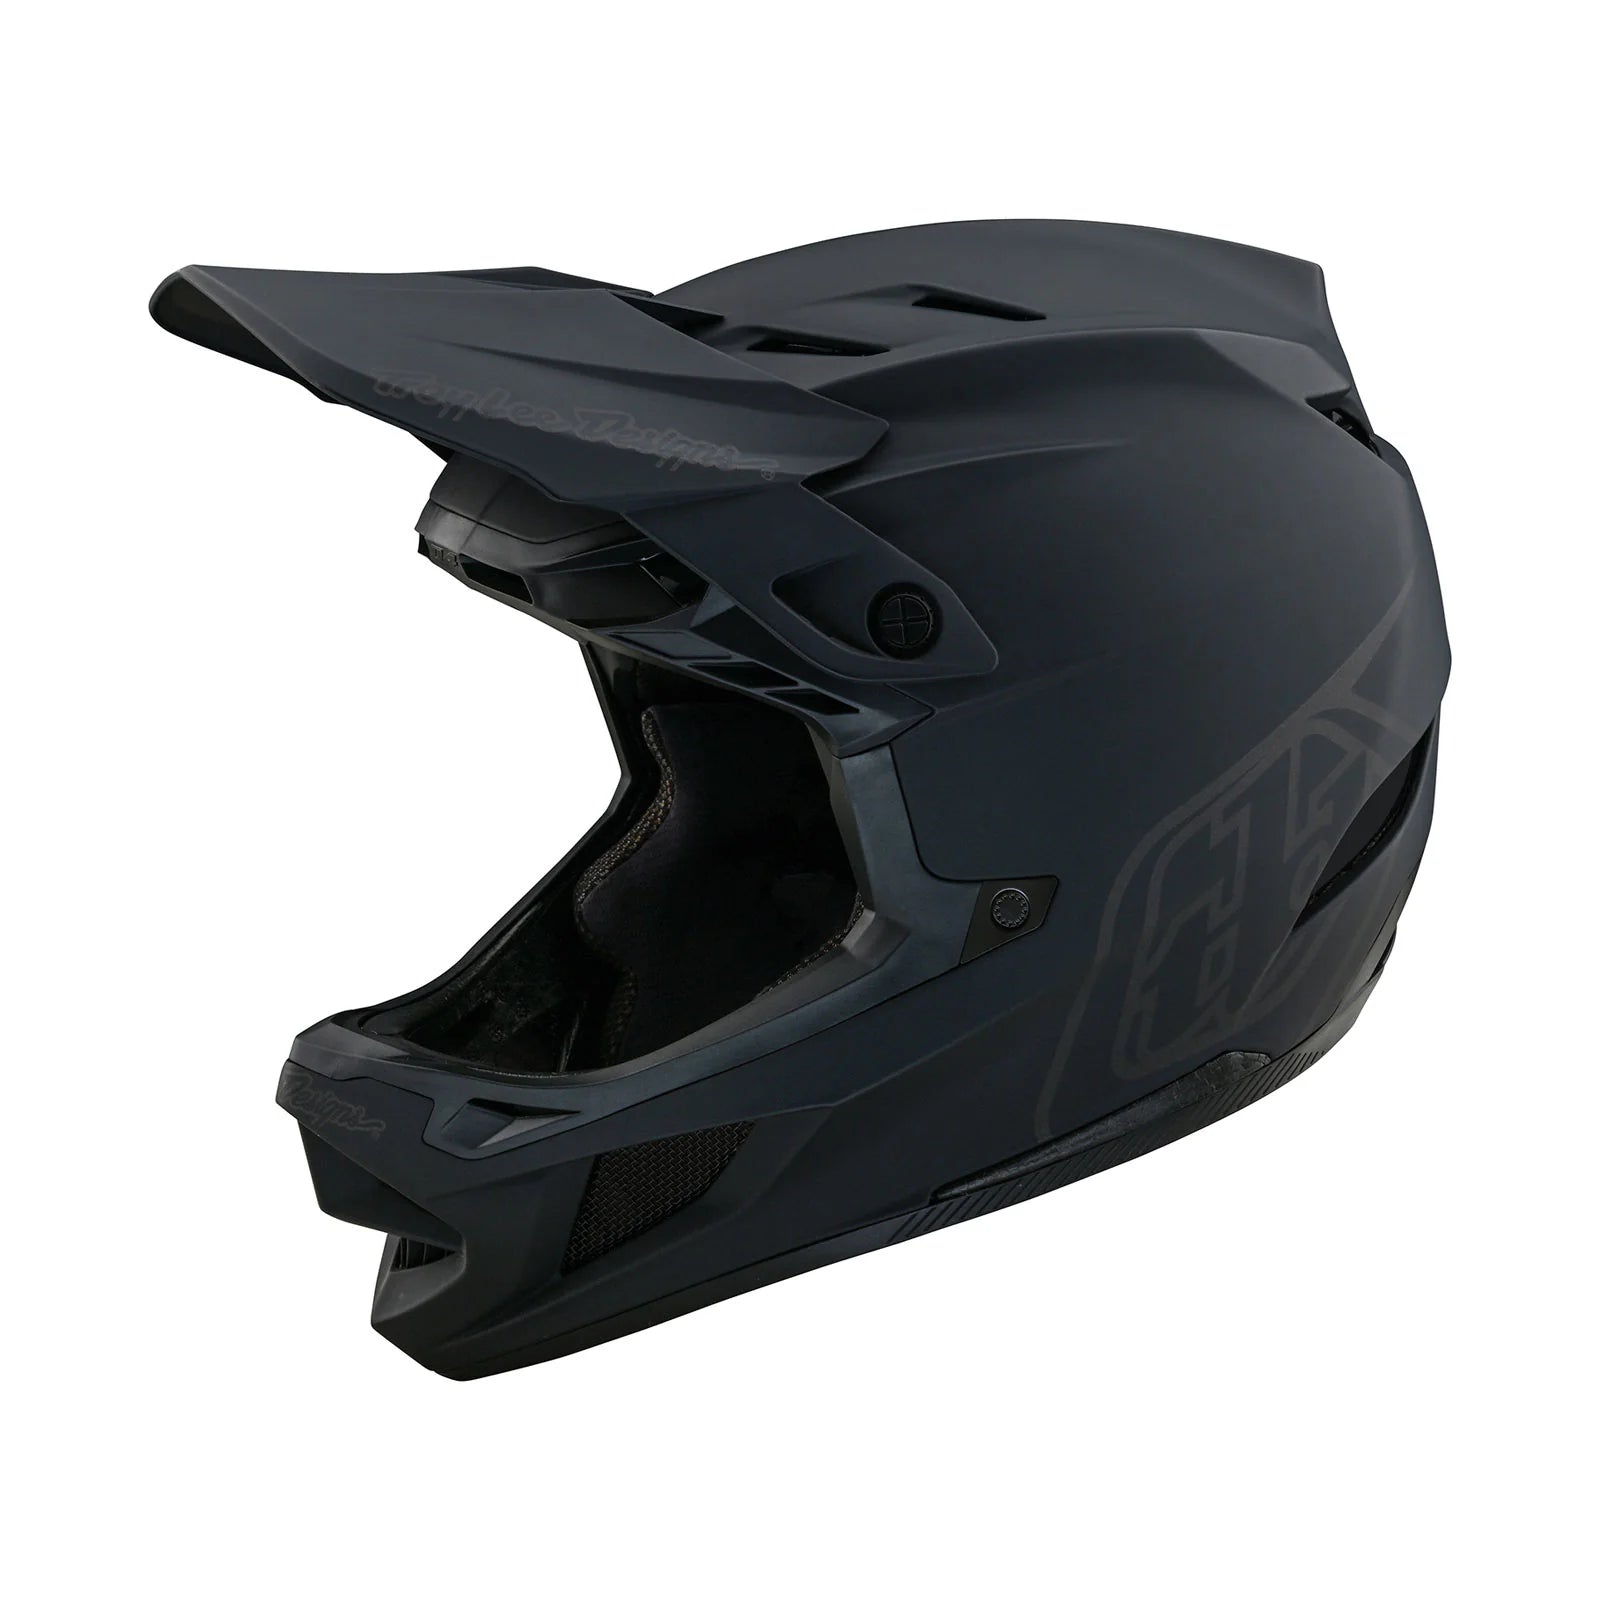 A TLD D4 AS Composite helmet W/MIPS Stealth Black on a white background.